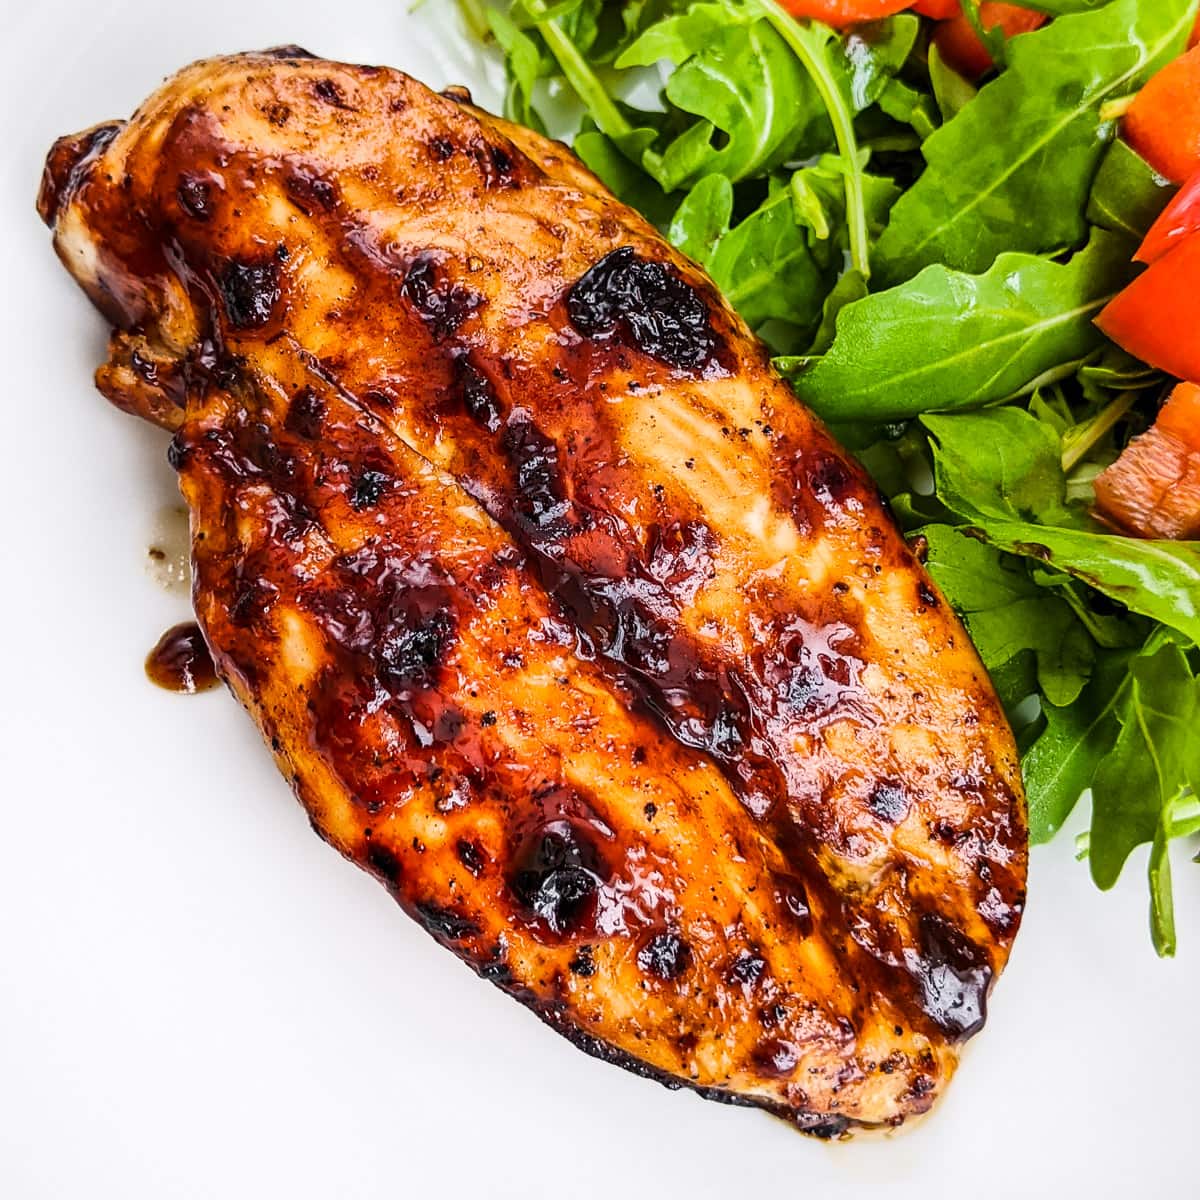 Close look at bbq chicken breast near salad leaves.